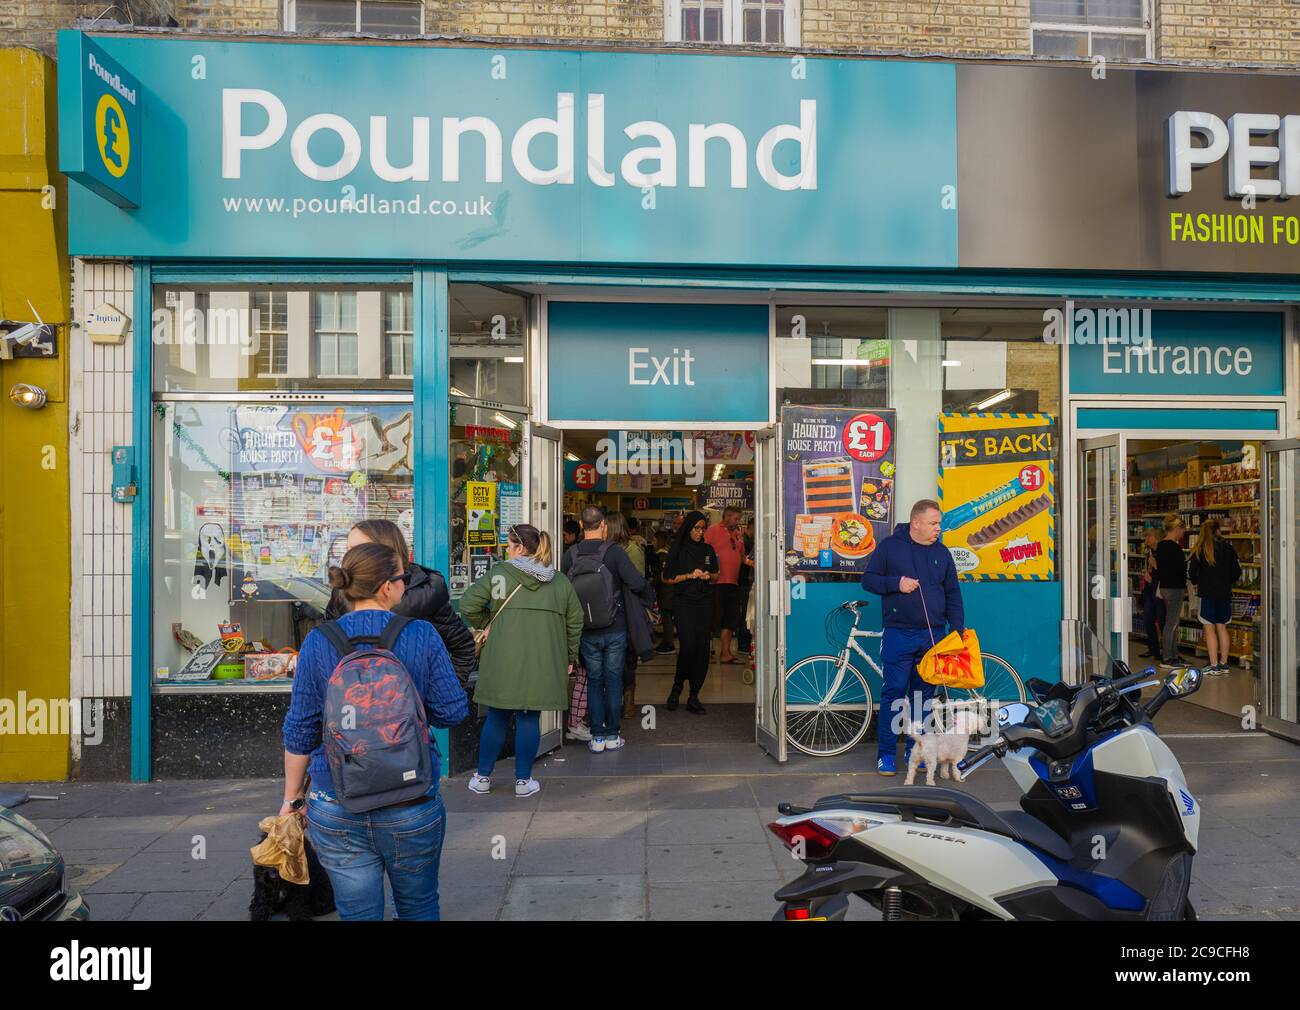 Entrance and Exit signs in exterior of Poundland shop, London, UK. Stock Photo